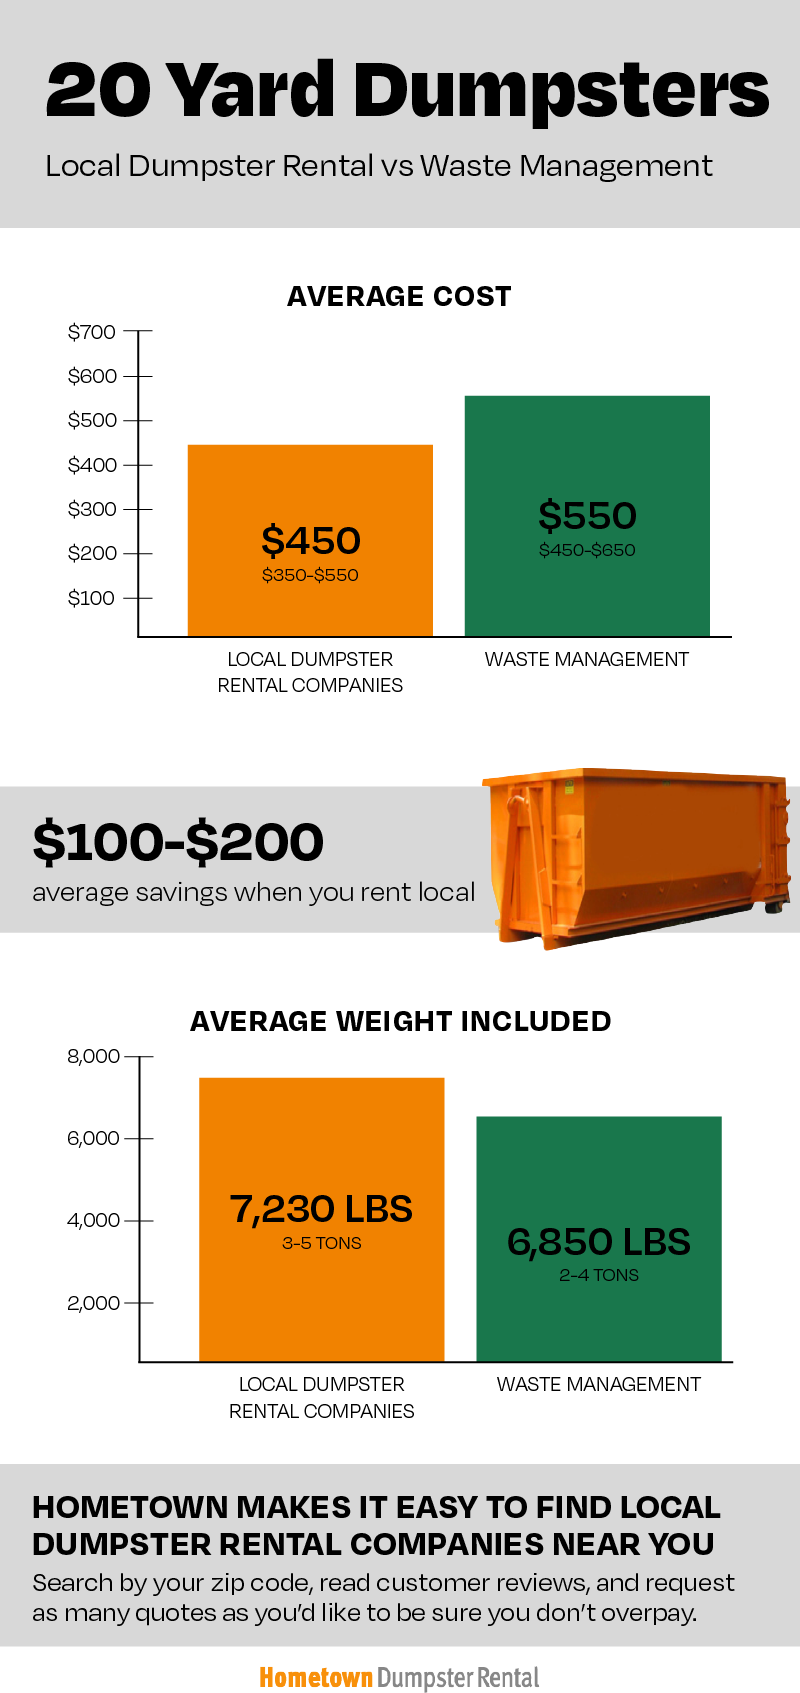 20 yard dumpster cost and weight comparison infographic